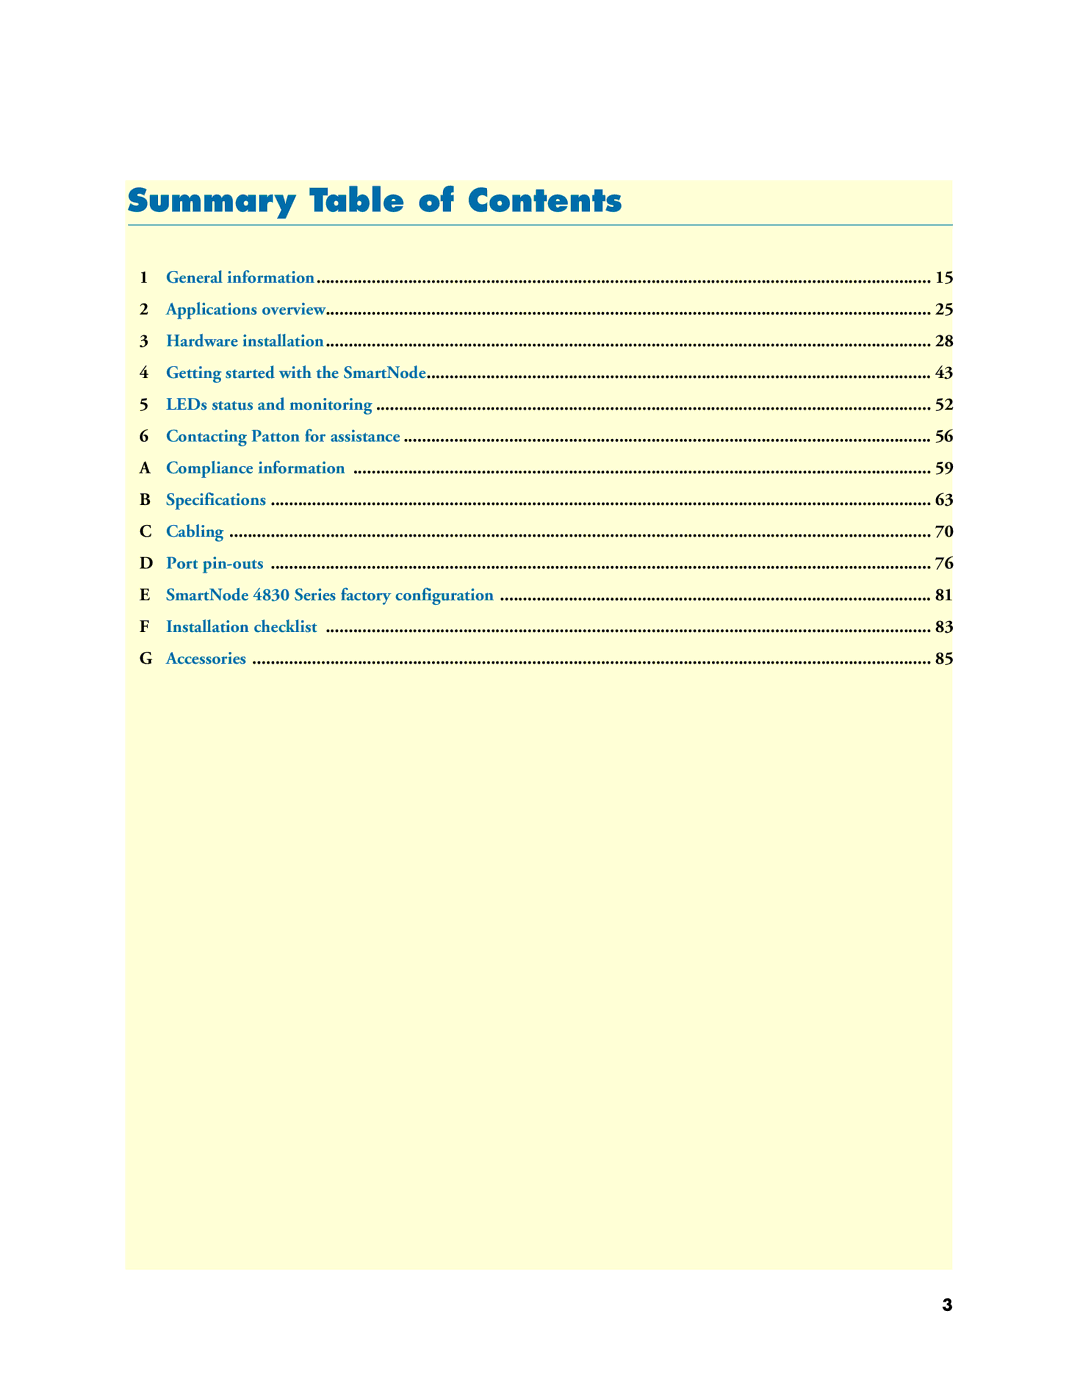 Patton electronic 4830 manual Summary Table of Contents 